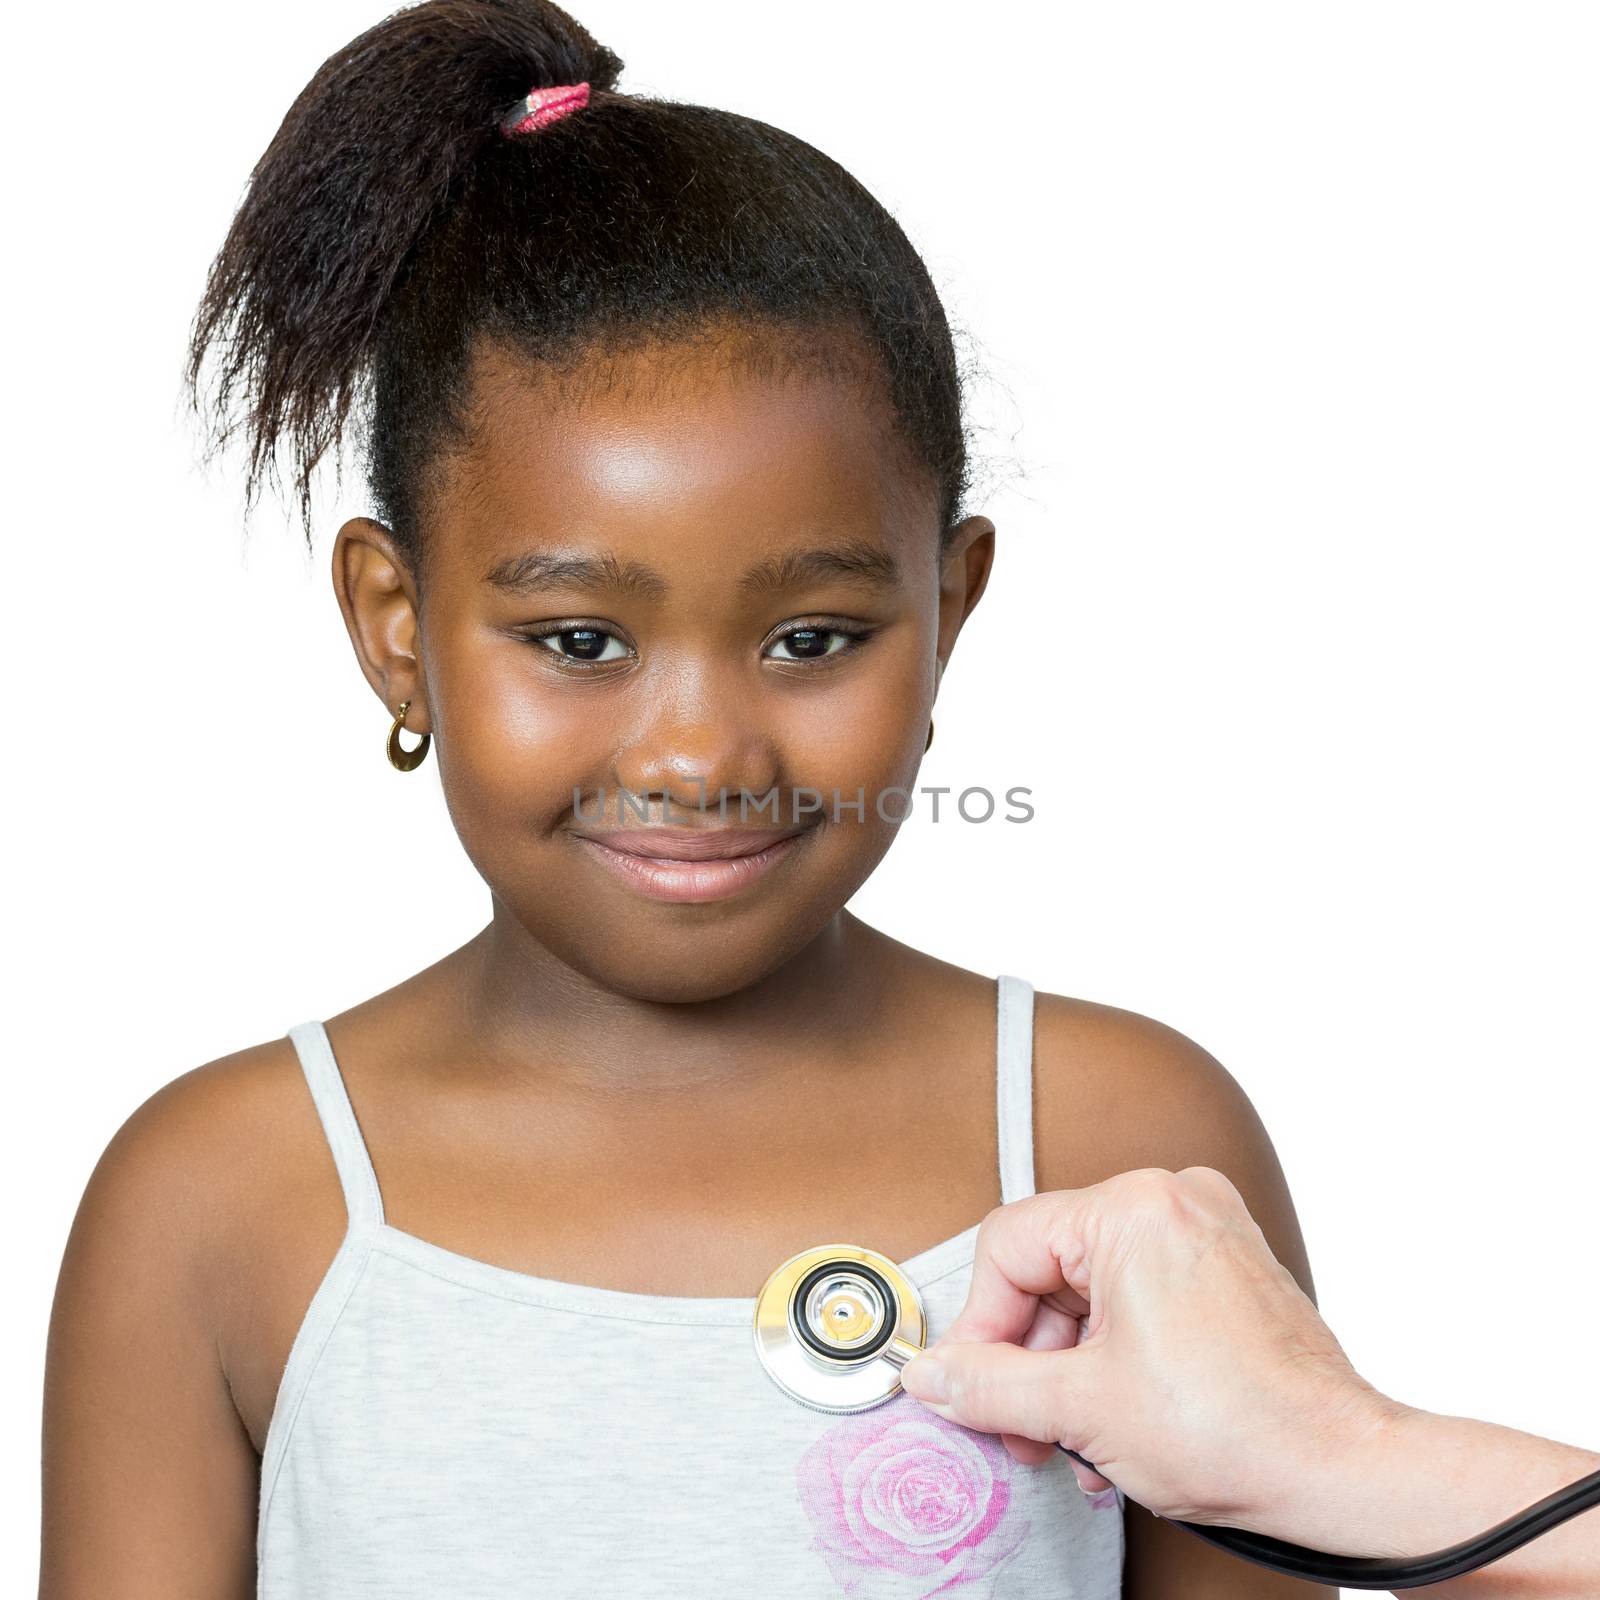 Close up portrait of cute little african girl having heartbeat taken.Hand positioning stethoscope against chest.Isolated on white background.